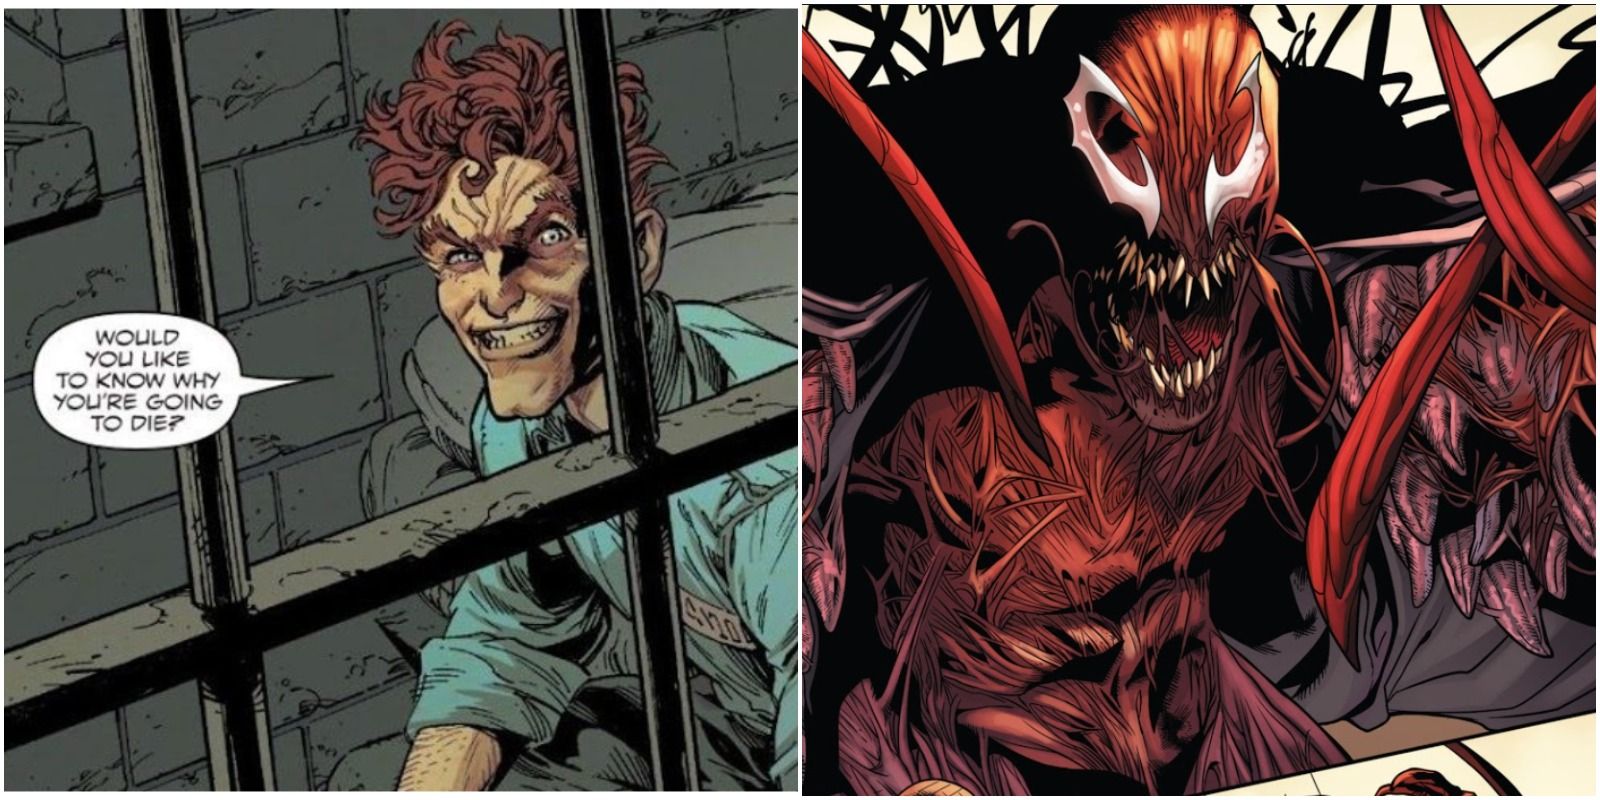 Cletus/Carnage just being creepy and scary